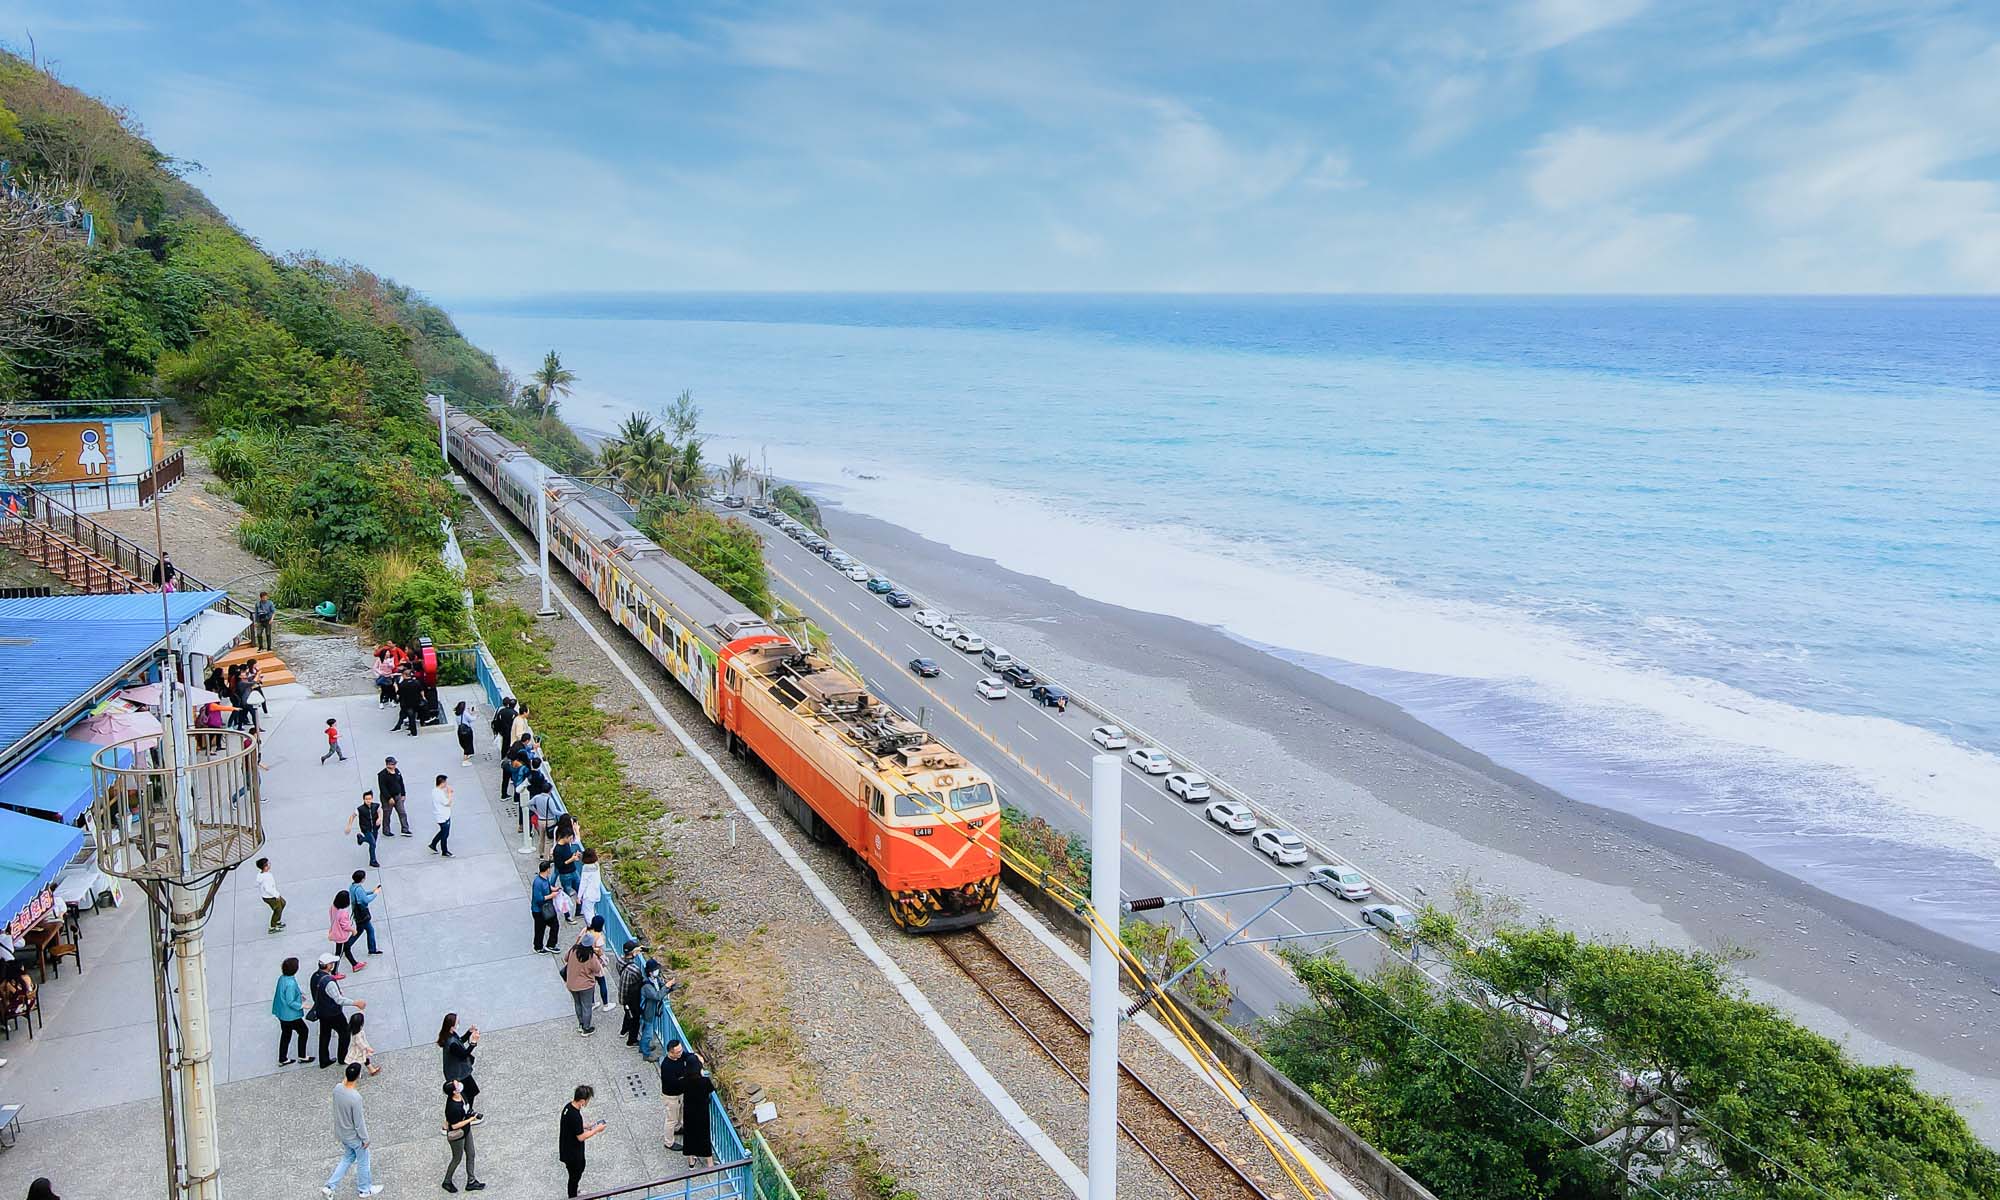 Duoliang Train Station is located on the Eastern Line between Taitung and Pingtung.